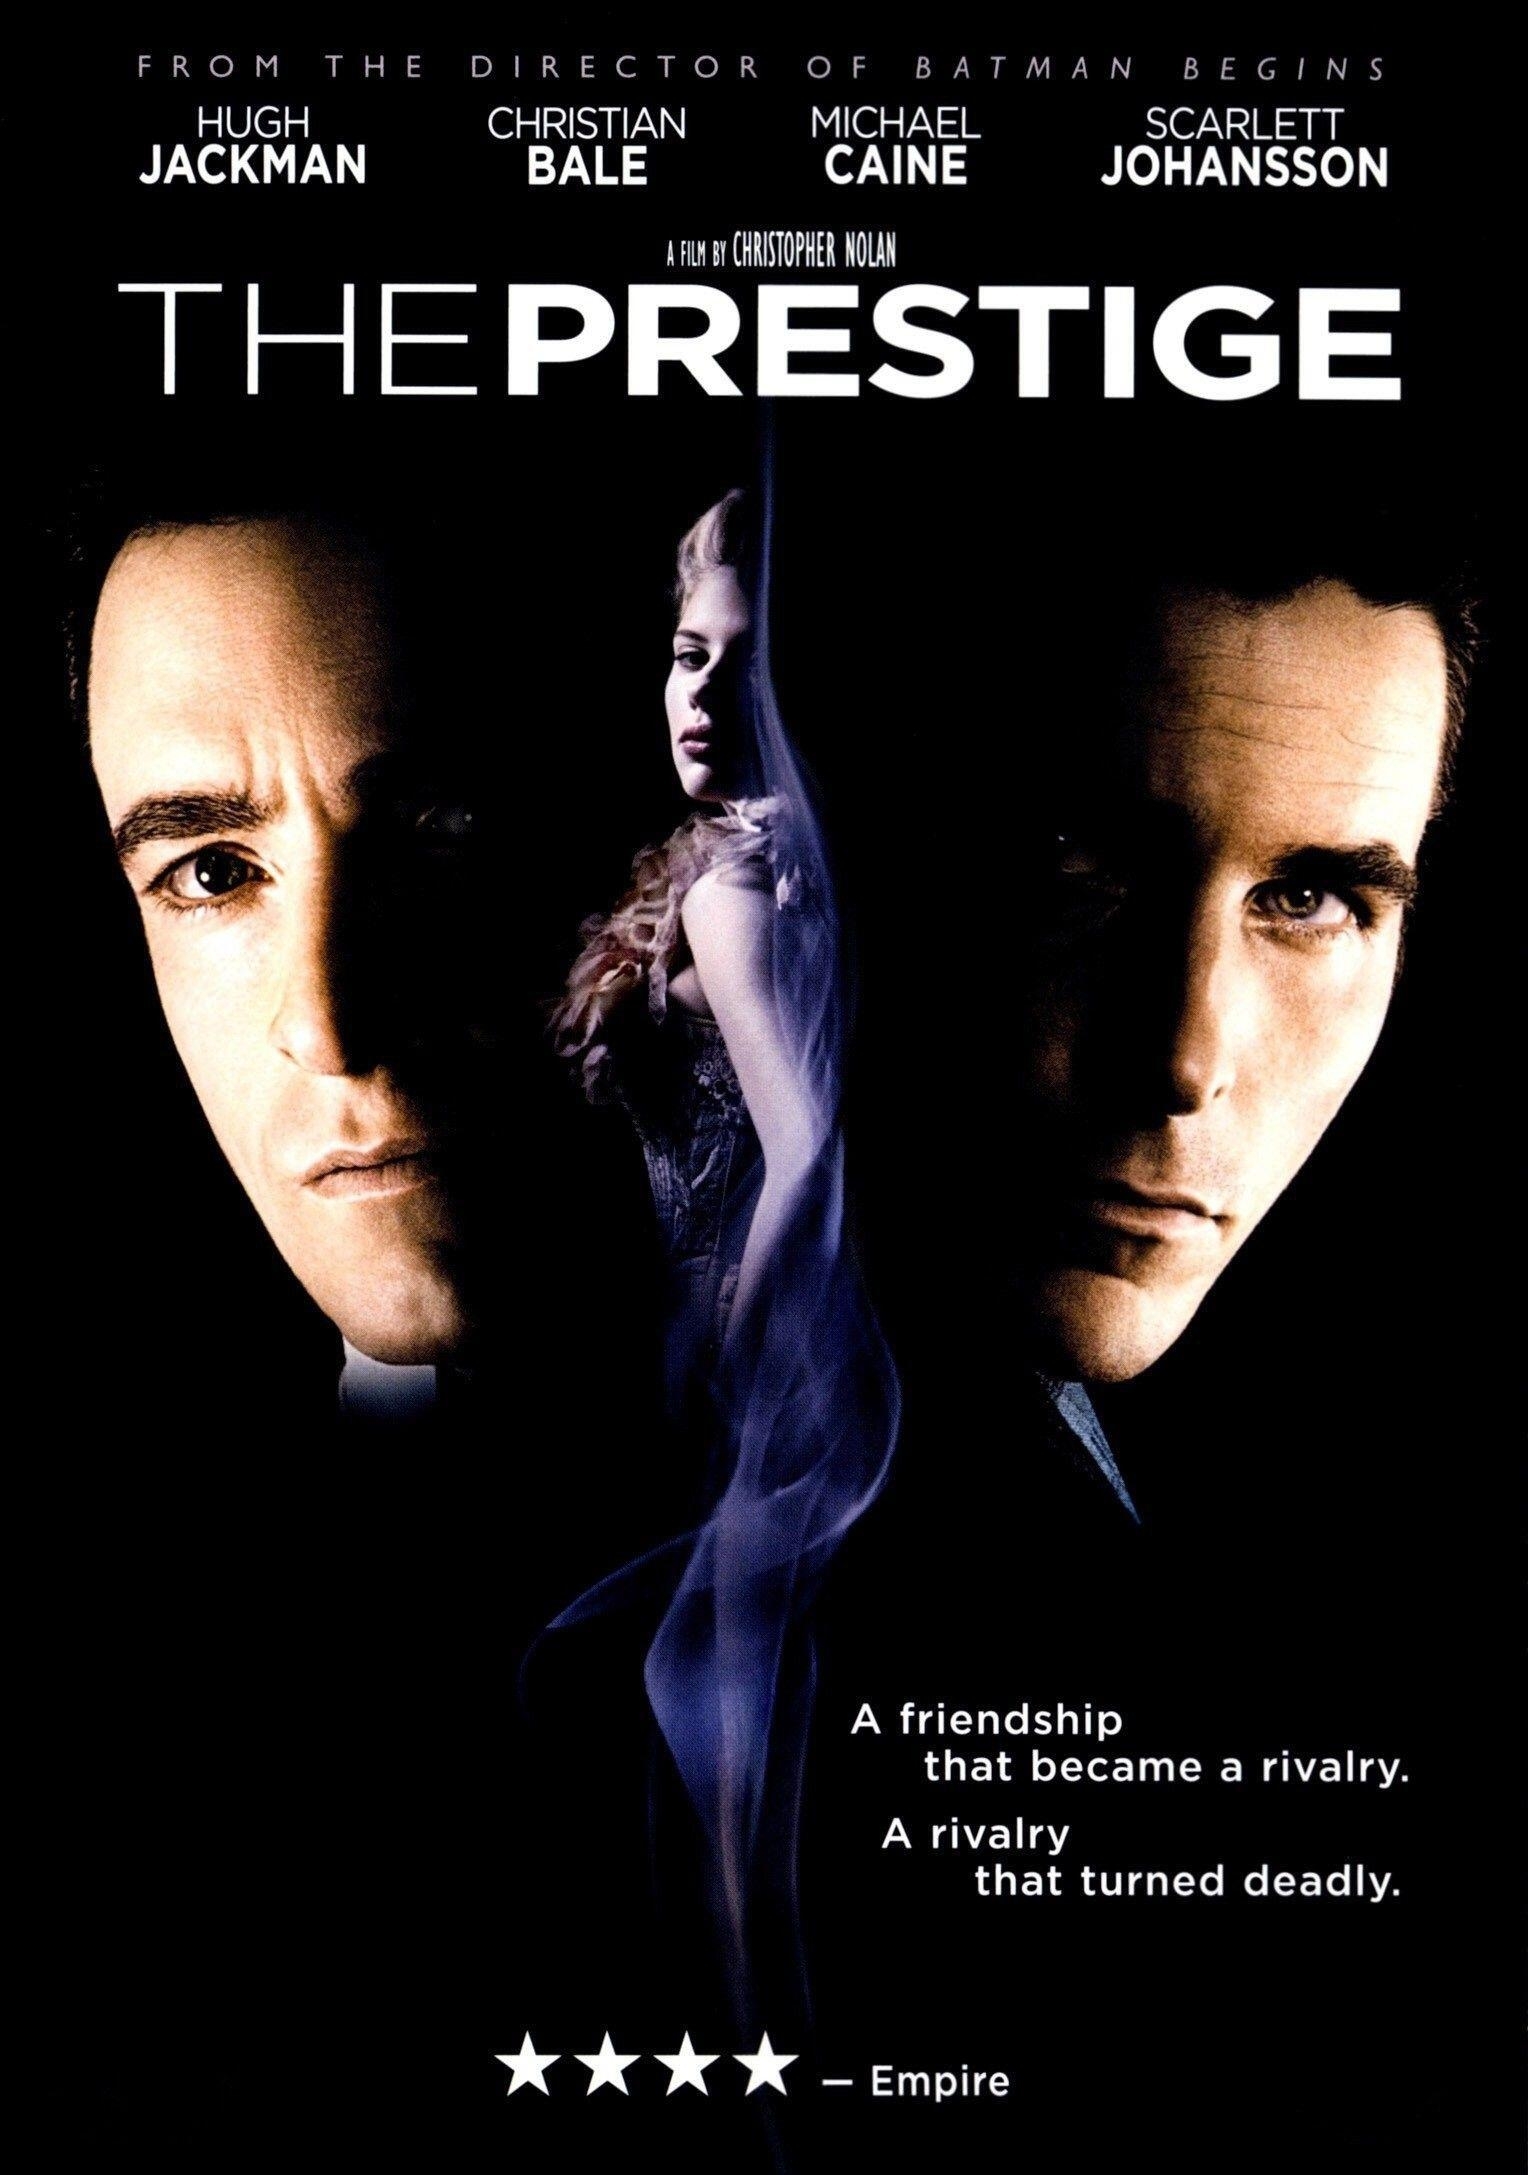 Scarlett Johansson is in the center frame, flanked by large images of Hugh Jackman and Christian Bale&#x27;s head, on The Prestige movie poster.